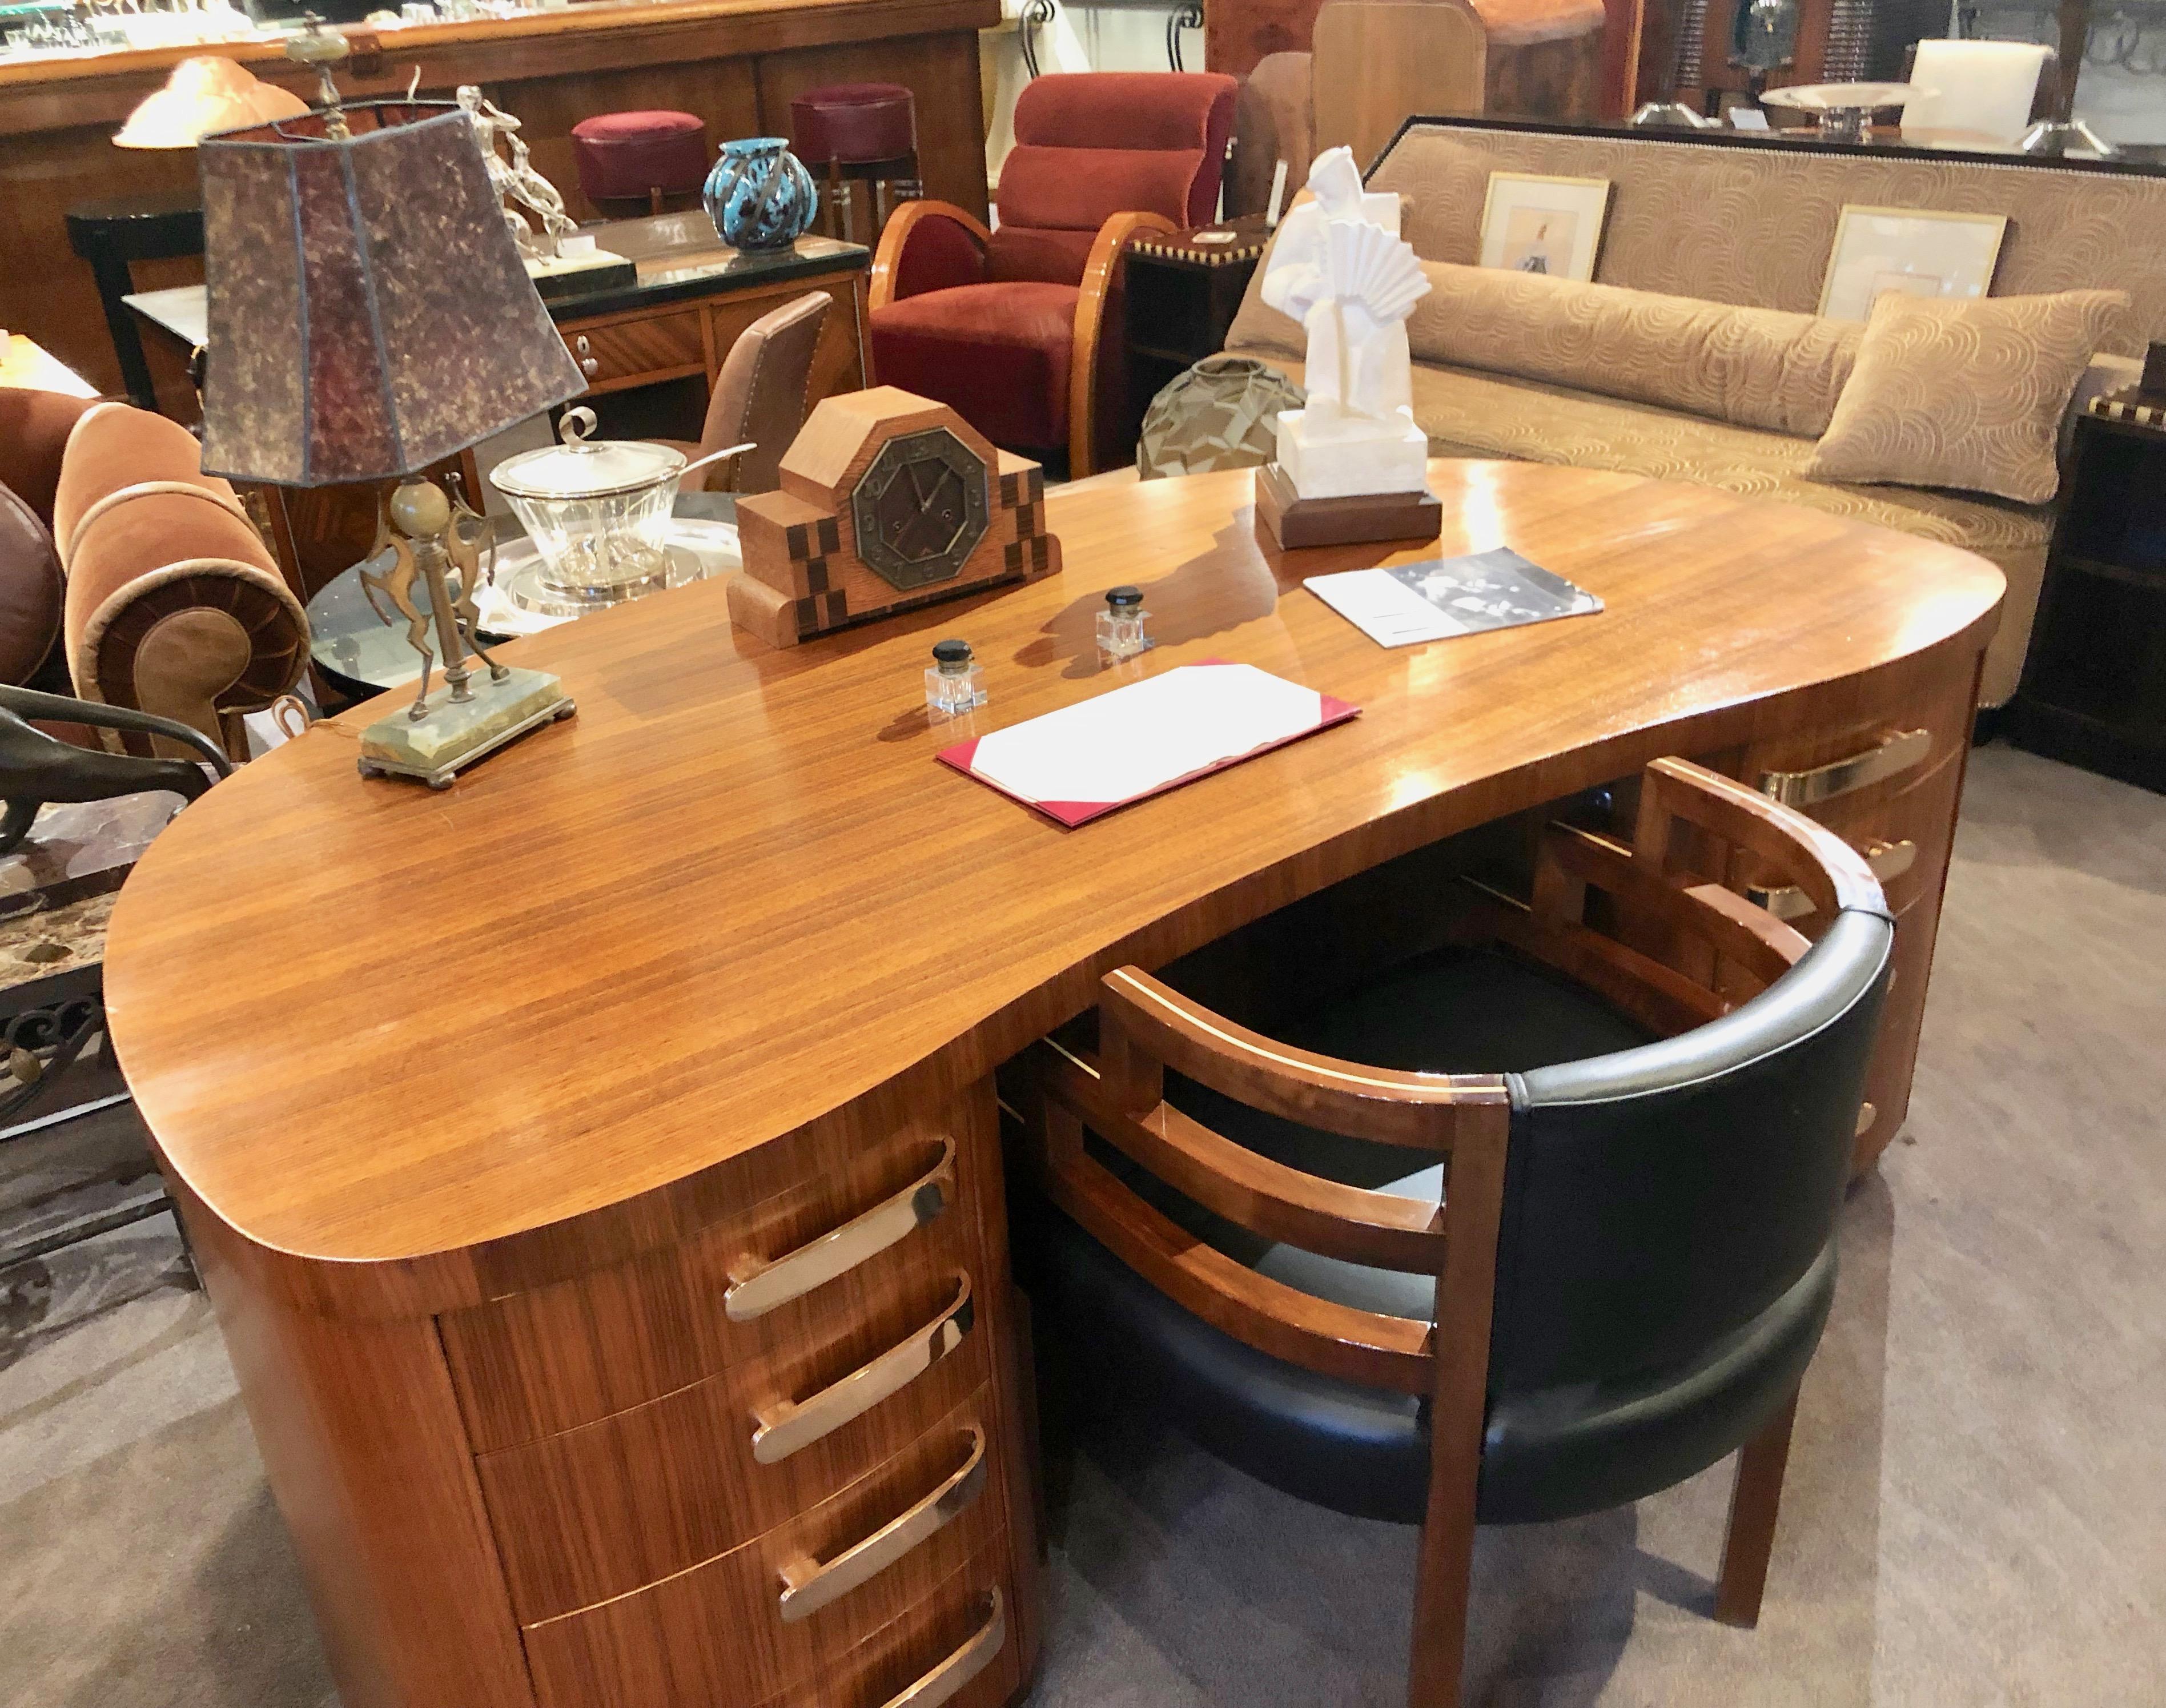 Executive Art Deco midcentury era desk, extremely well made in America (Grand Rapids, Michigan) by Stow & Davis. Twin pedestal bases with a complementary top, echoes this classic shape. Very nice mahogany veneers and lots of drawers for just about